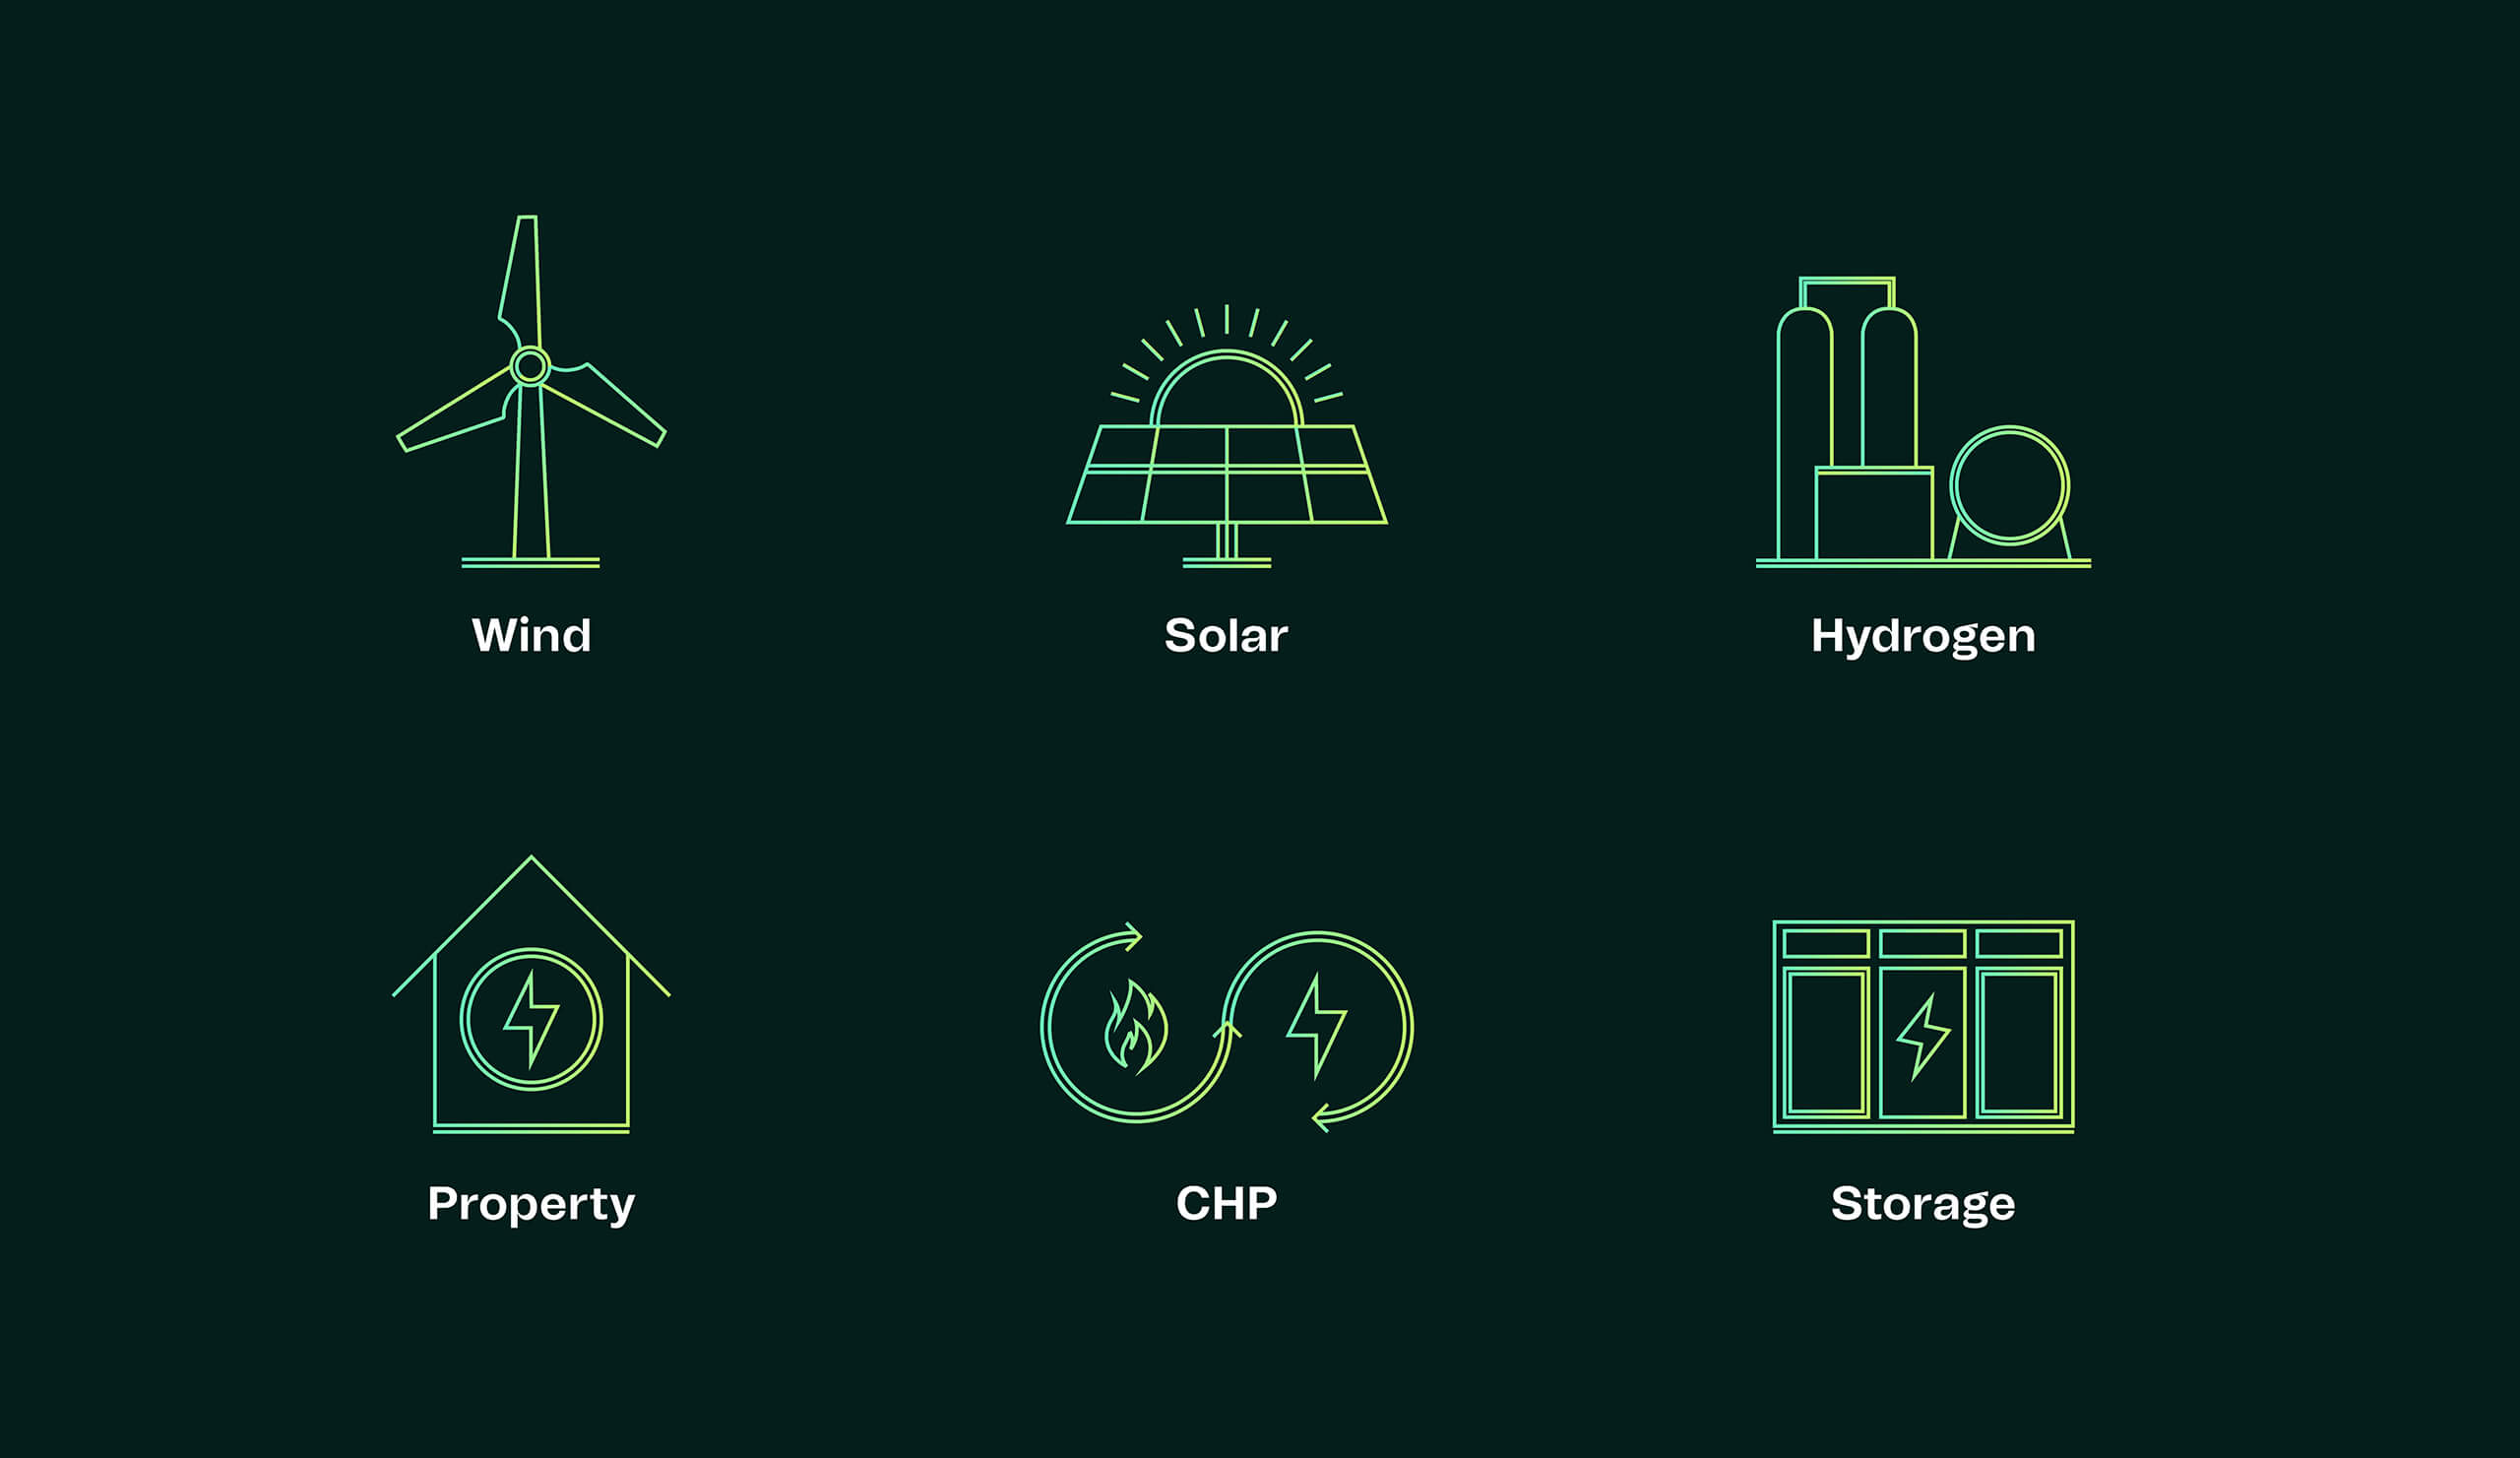 3REnergy various icons related to the project